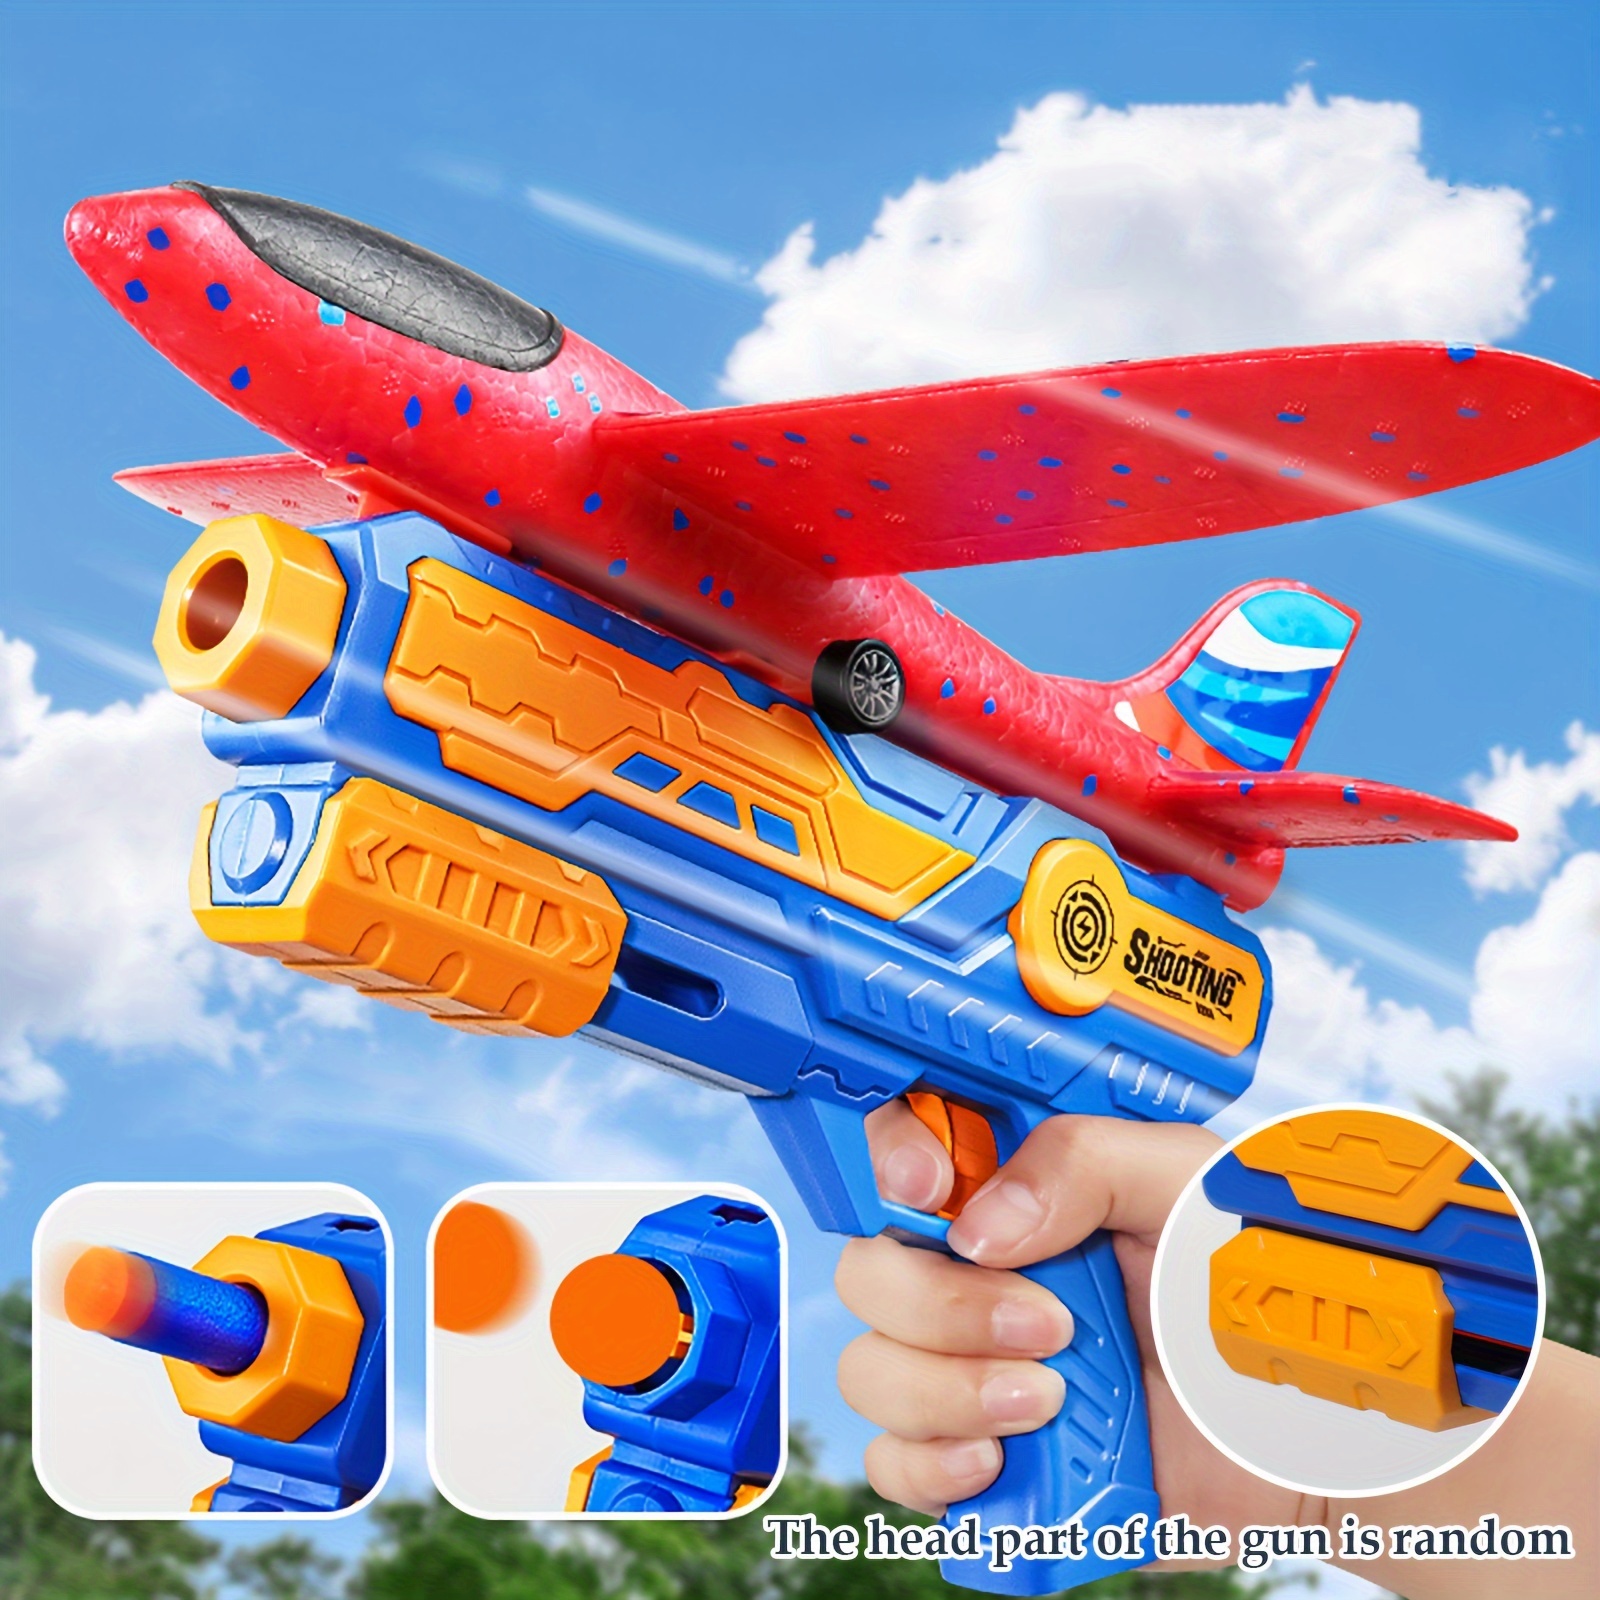 2pcs Airplane Activities for Kids Airplane Toys,Outdoor Toys